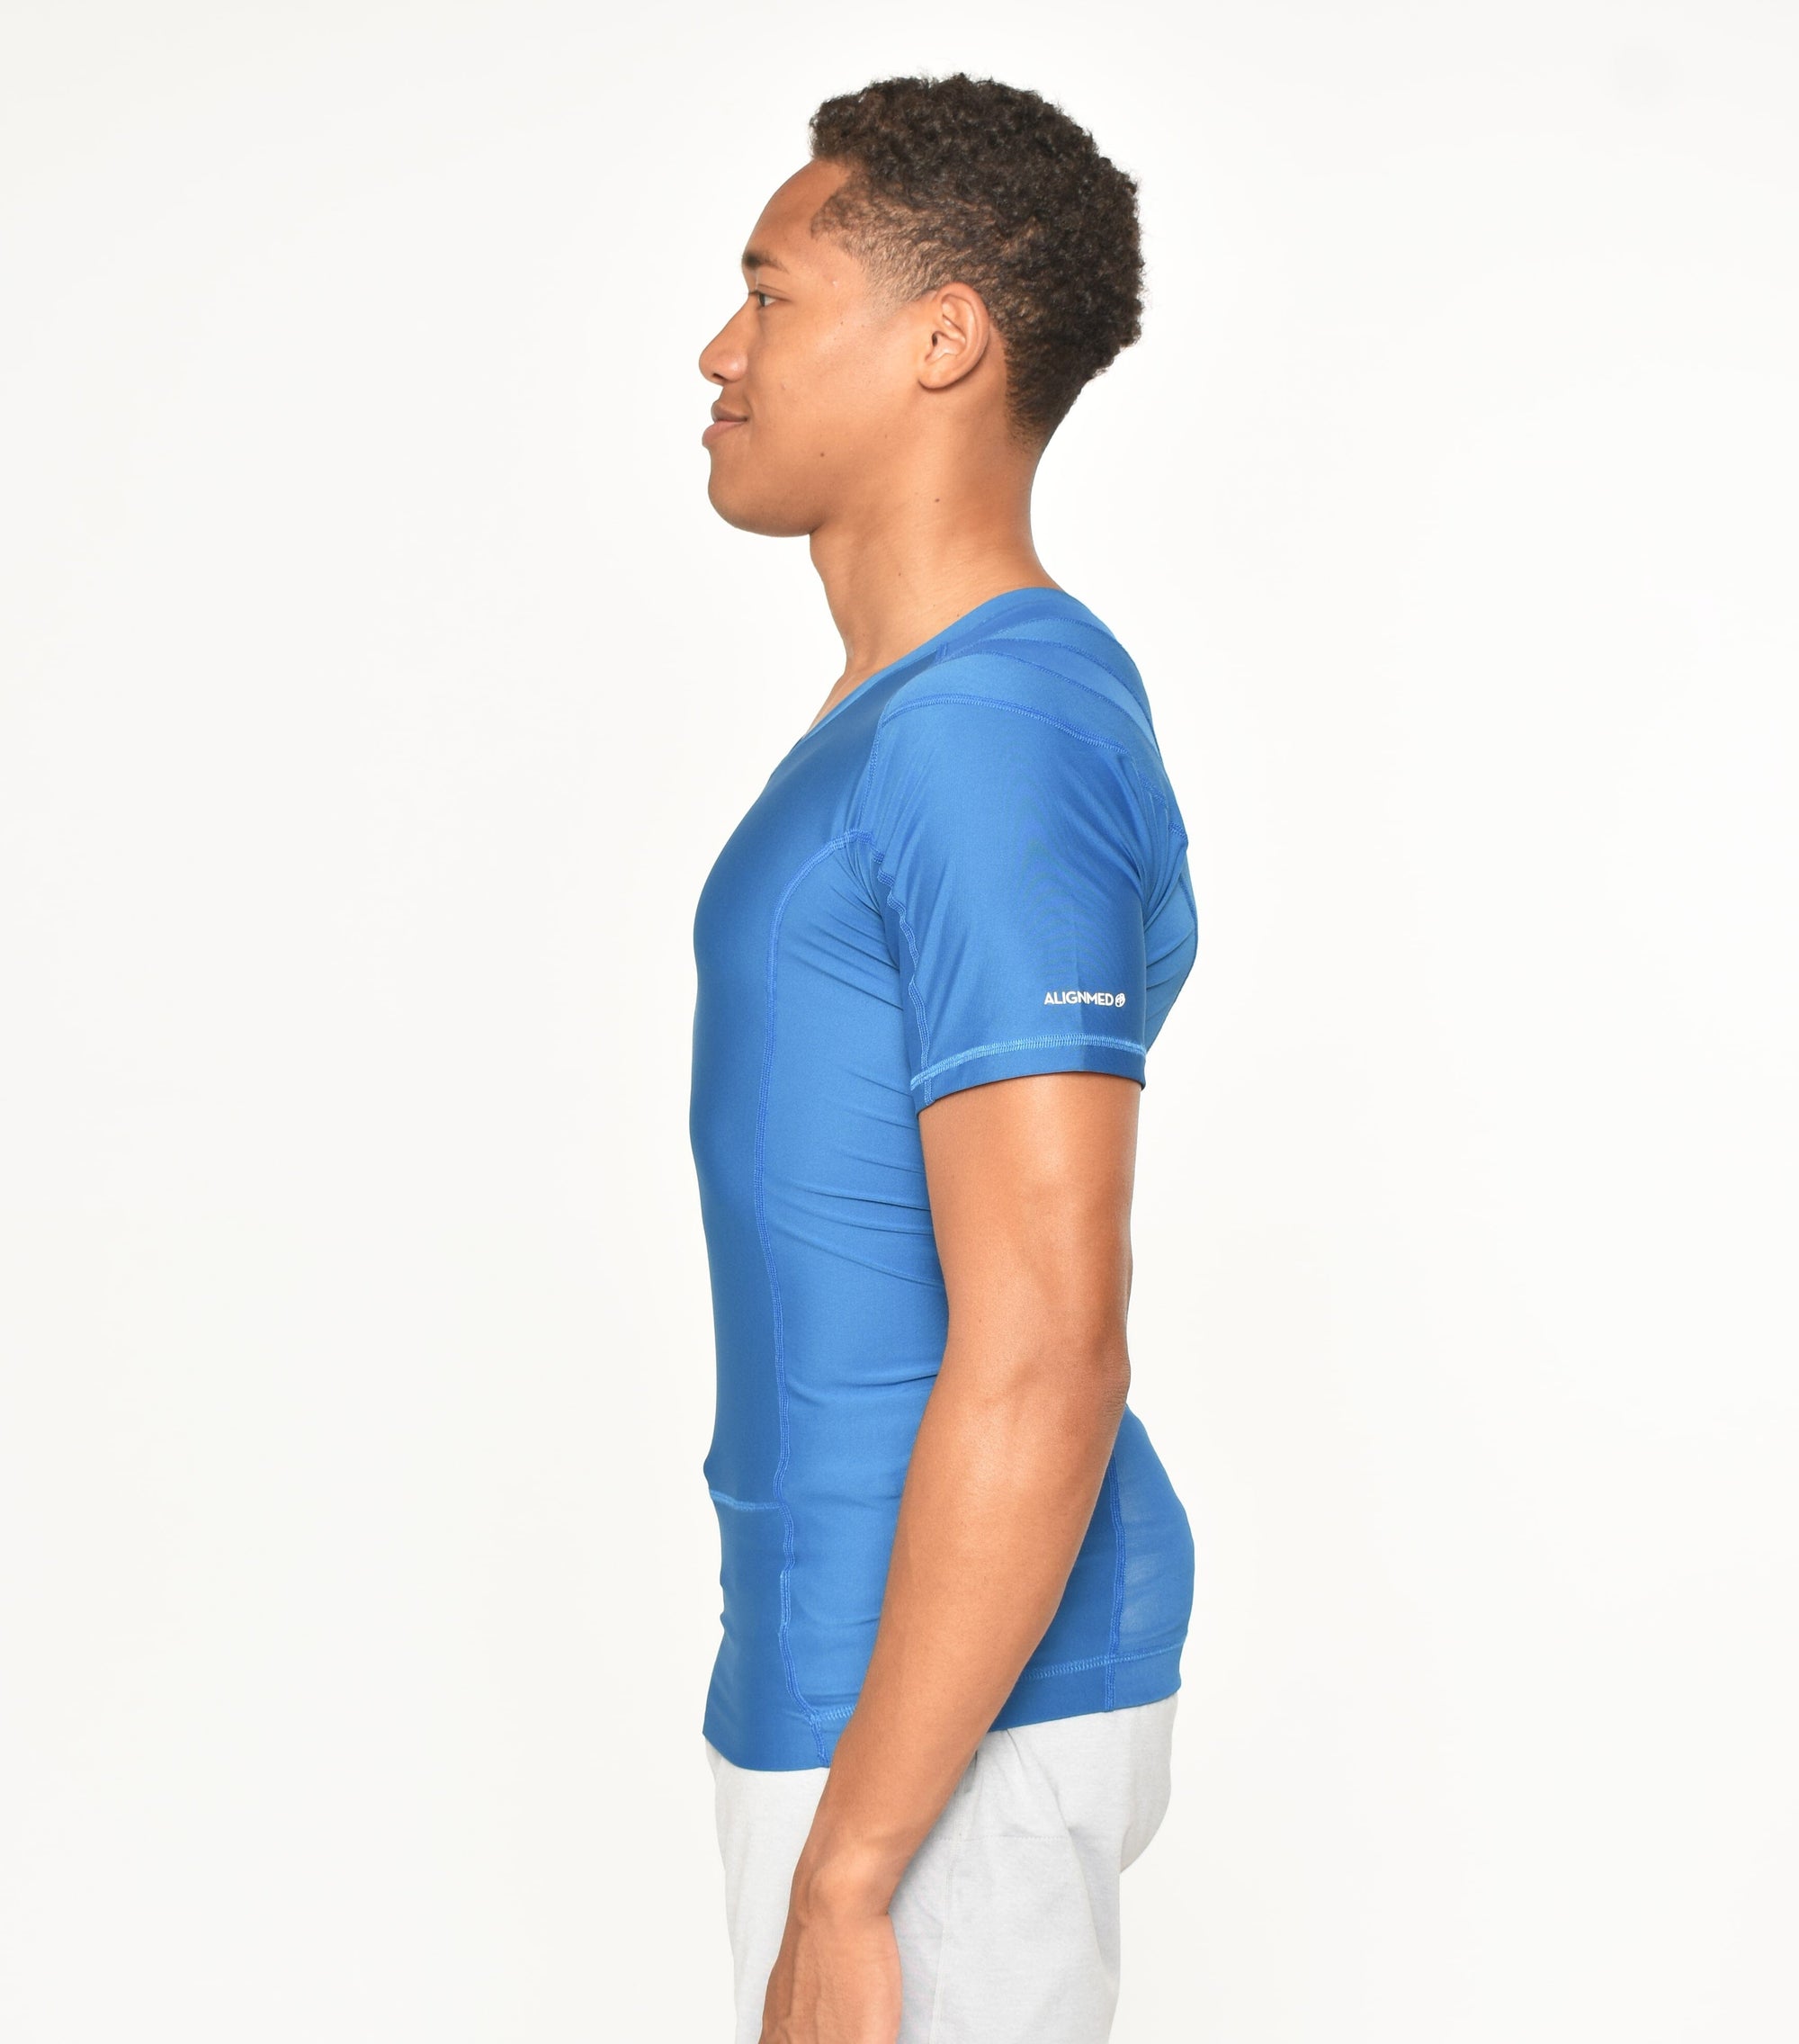 AlignMed Posture Shirt Fitting & Review 